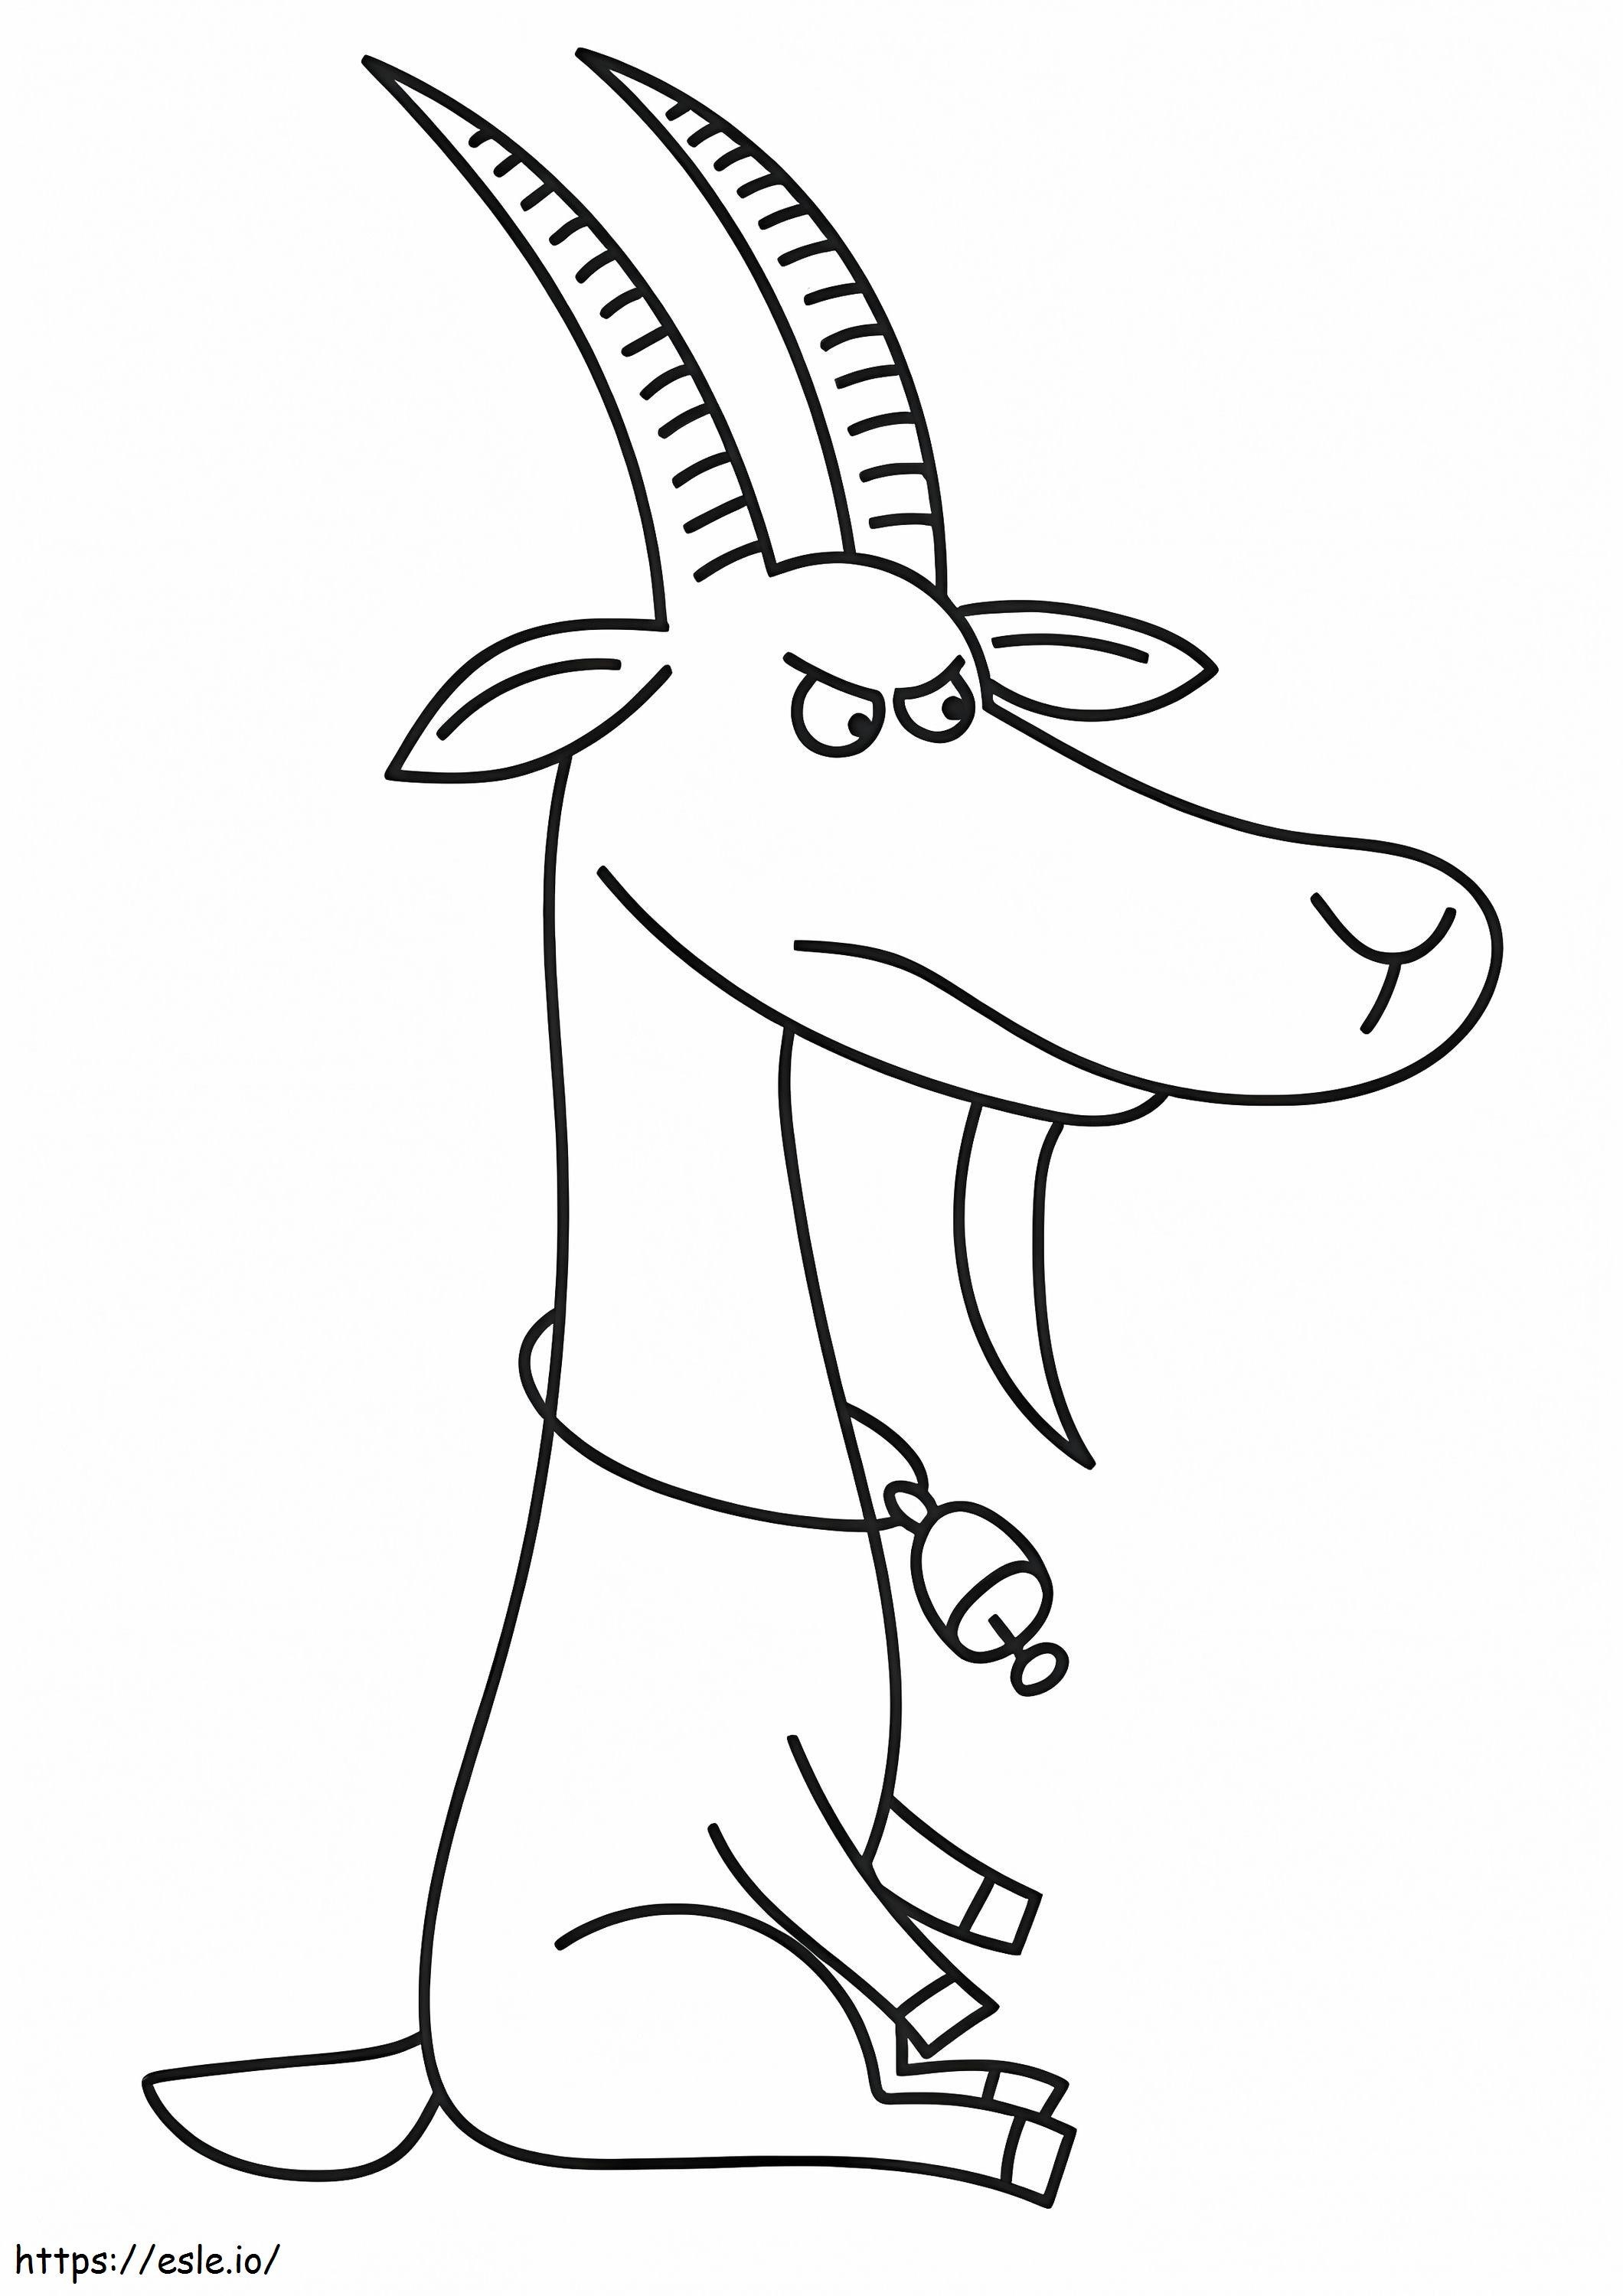 Angry Goat coloring page